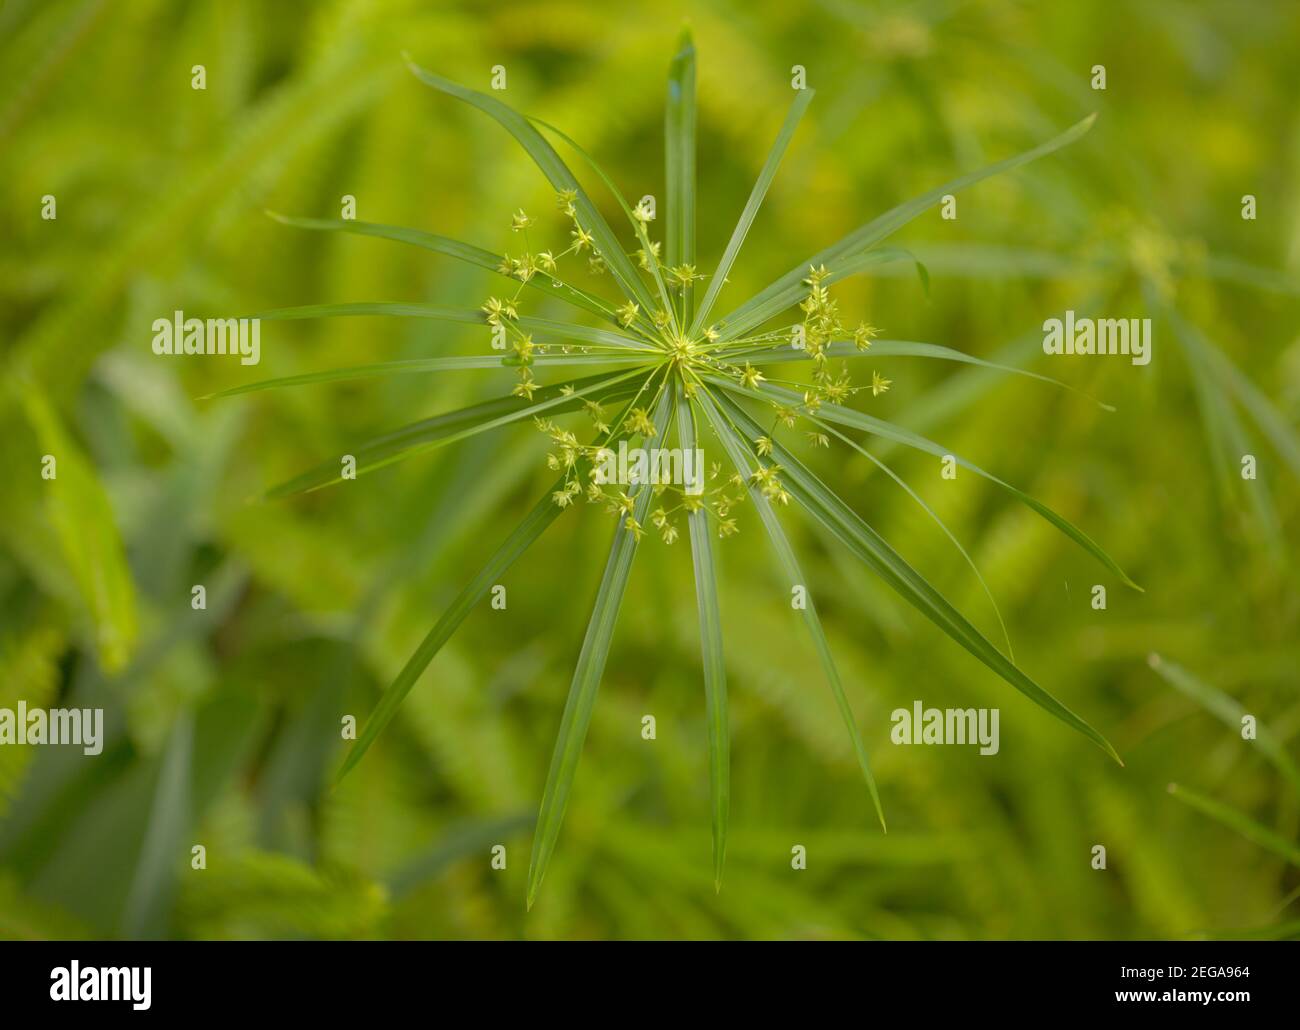 papyrus sedge radial green leaves natural macro floral background Stock Photo